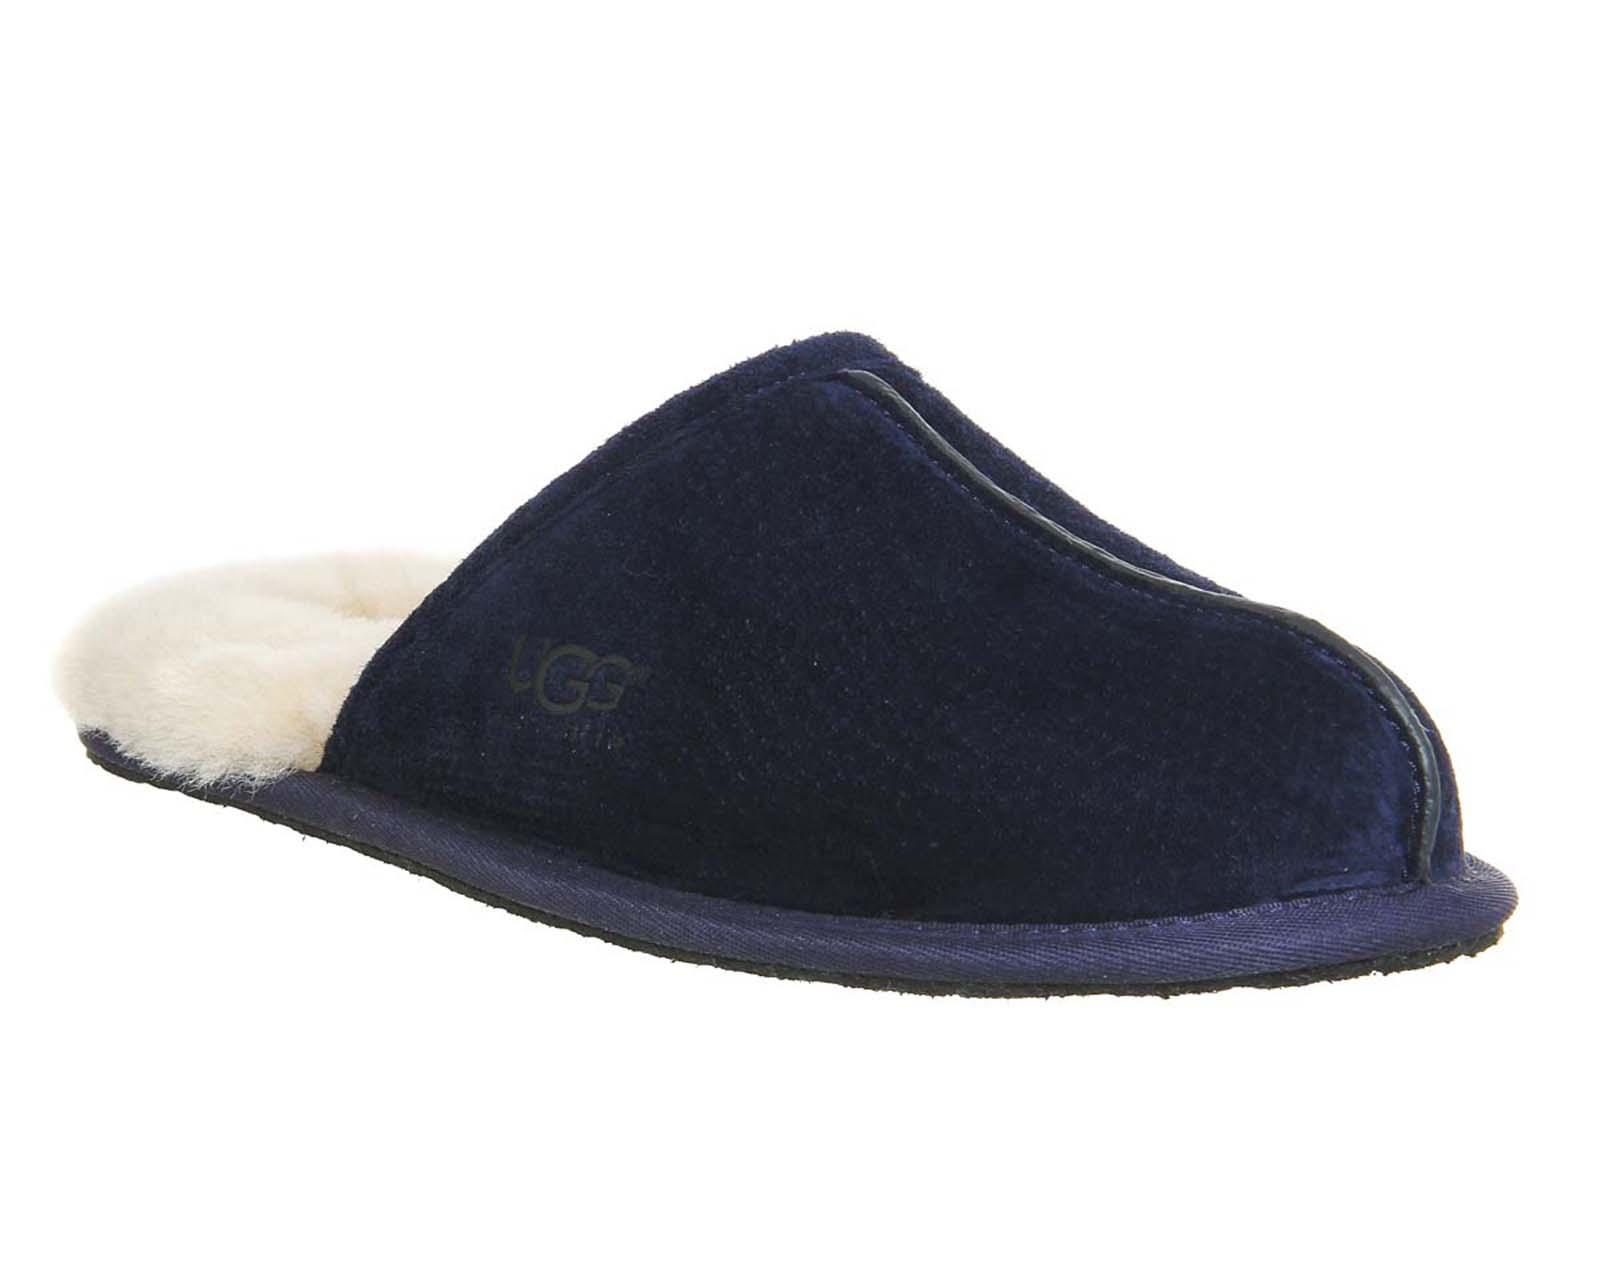 Lyst - Ugg Scuff Slippers in Blue for Men